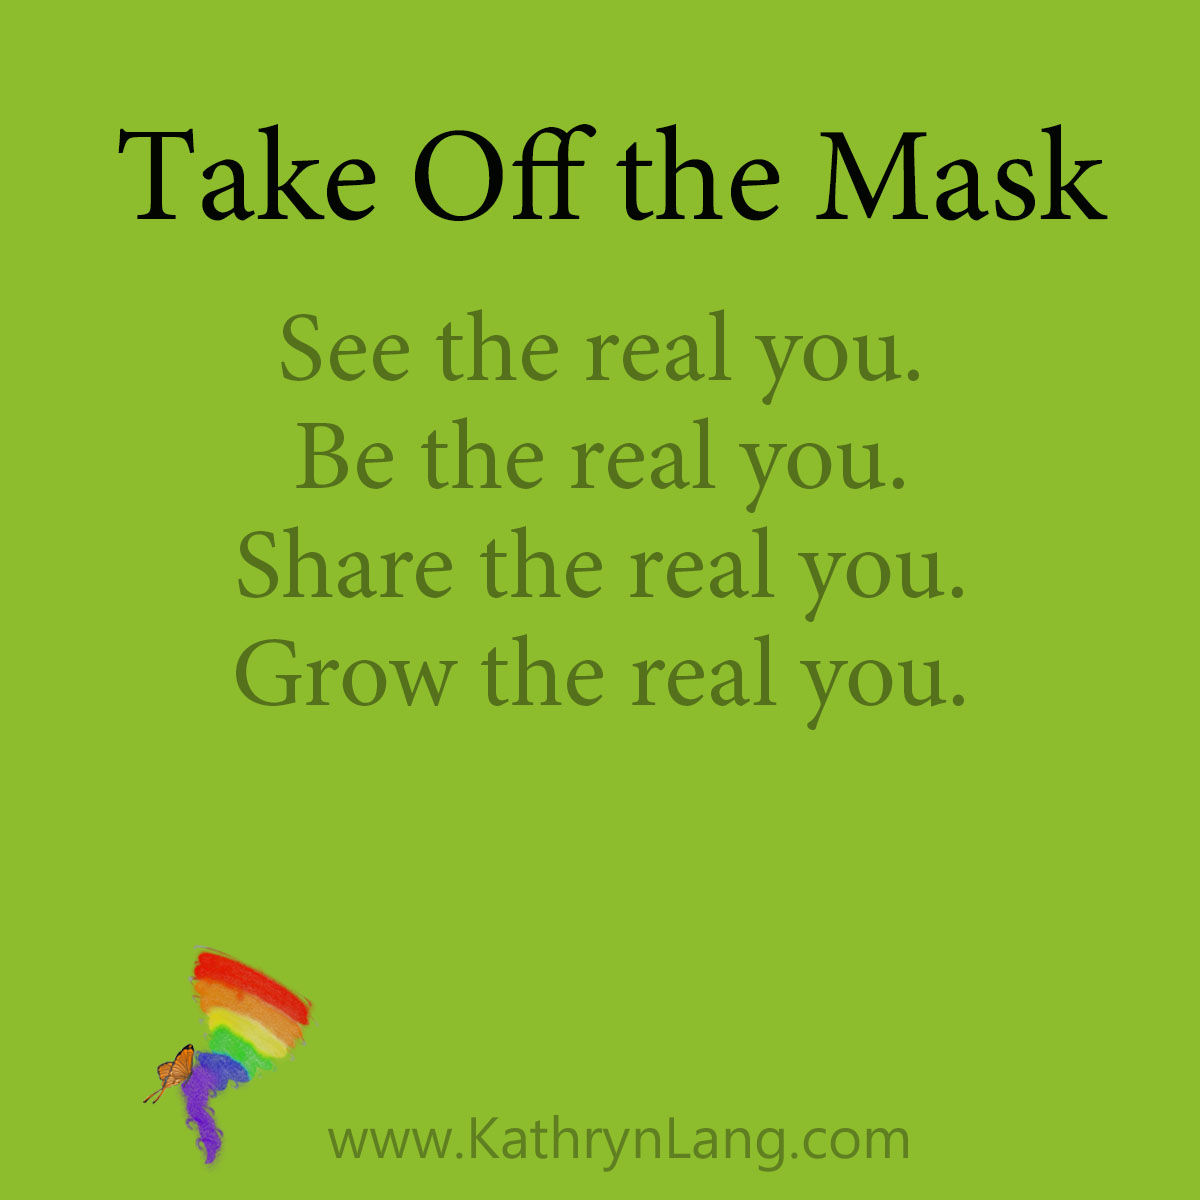 Take off the mask: 
See the real you.
Be the real you.
Share the real you.
Grow the real you.